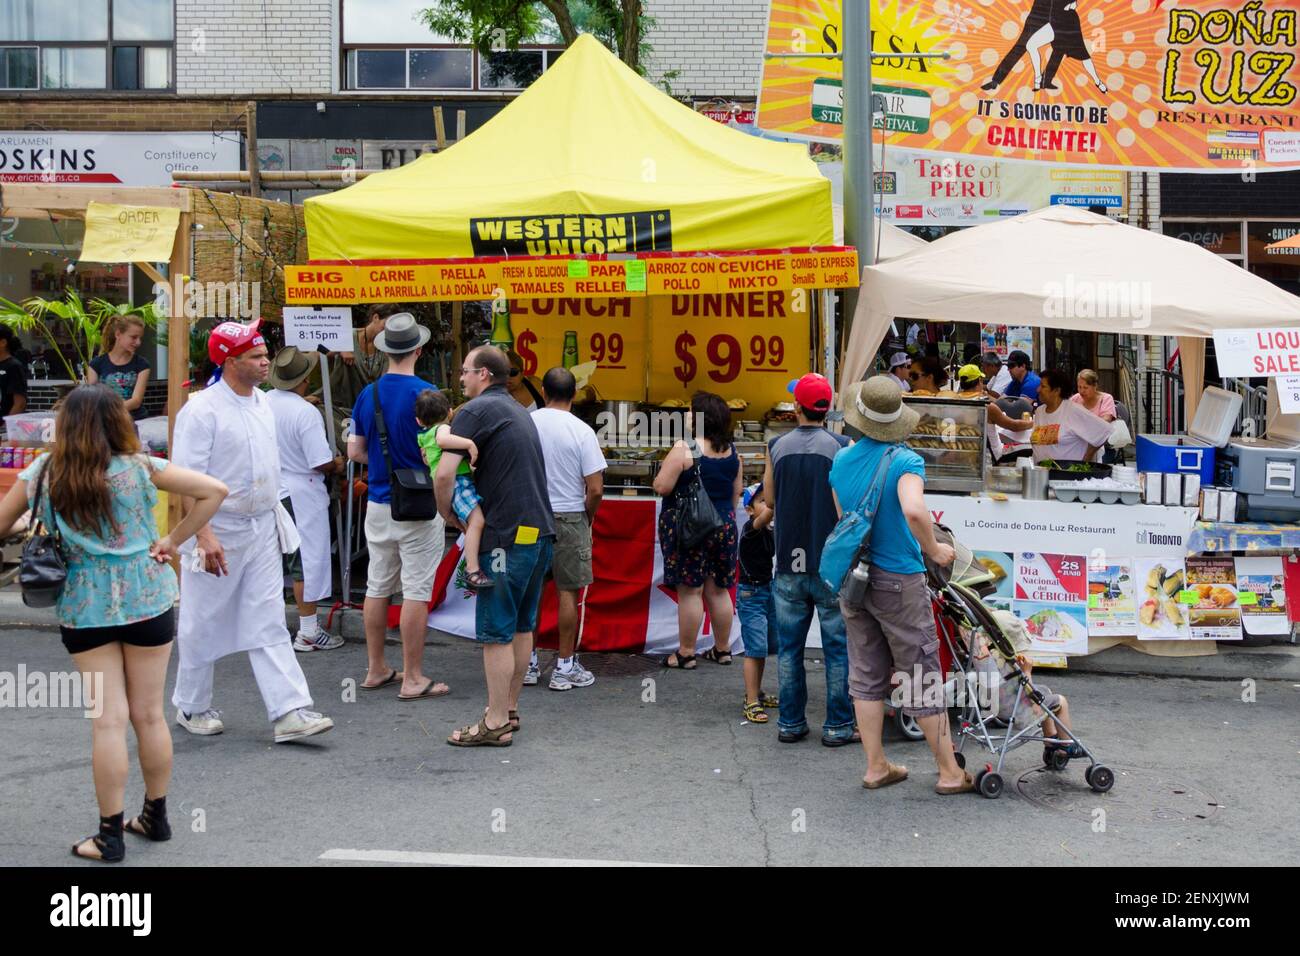 Salsa on St. Saint Clair Festival Scenes: Customers line up at outdoor food stand selling Mexican food. Some of the people are taking time to read the Stock Photo